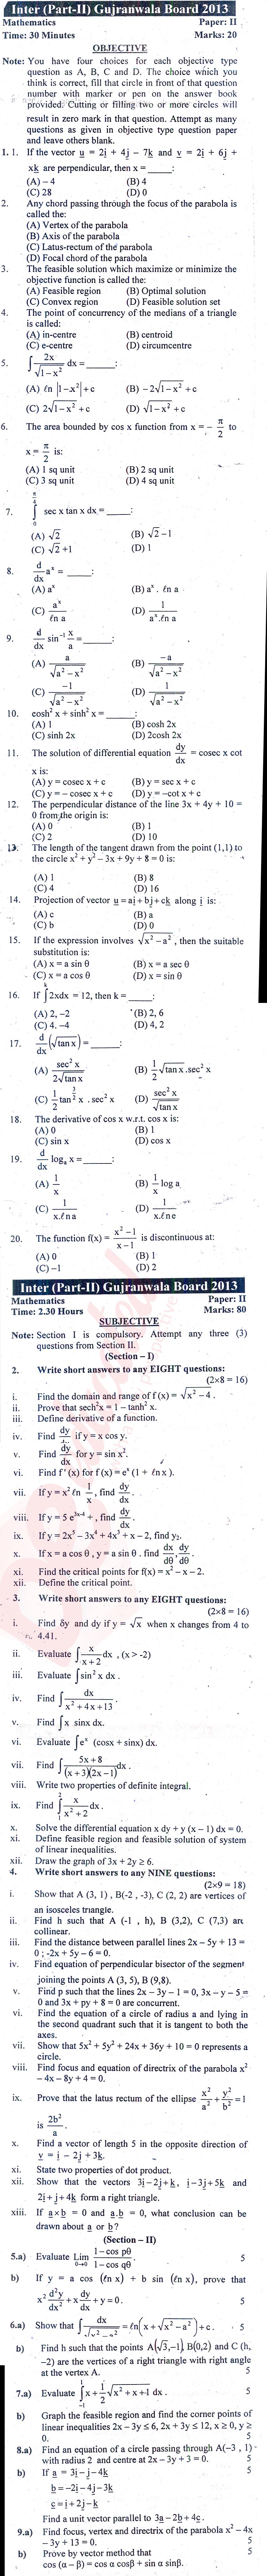 Math 12th class Past Paper Group 1 BISE Gujranwala 2013